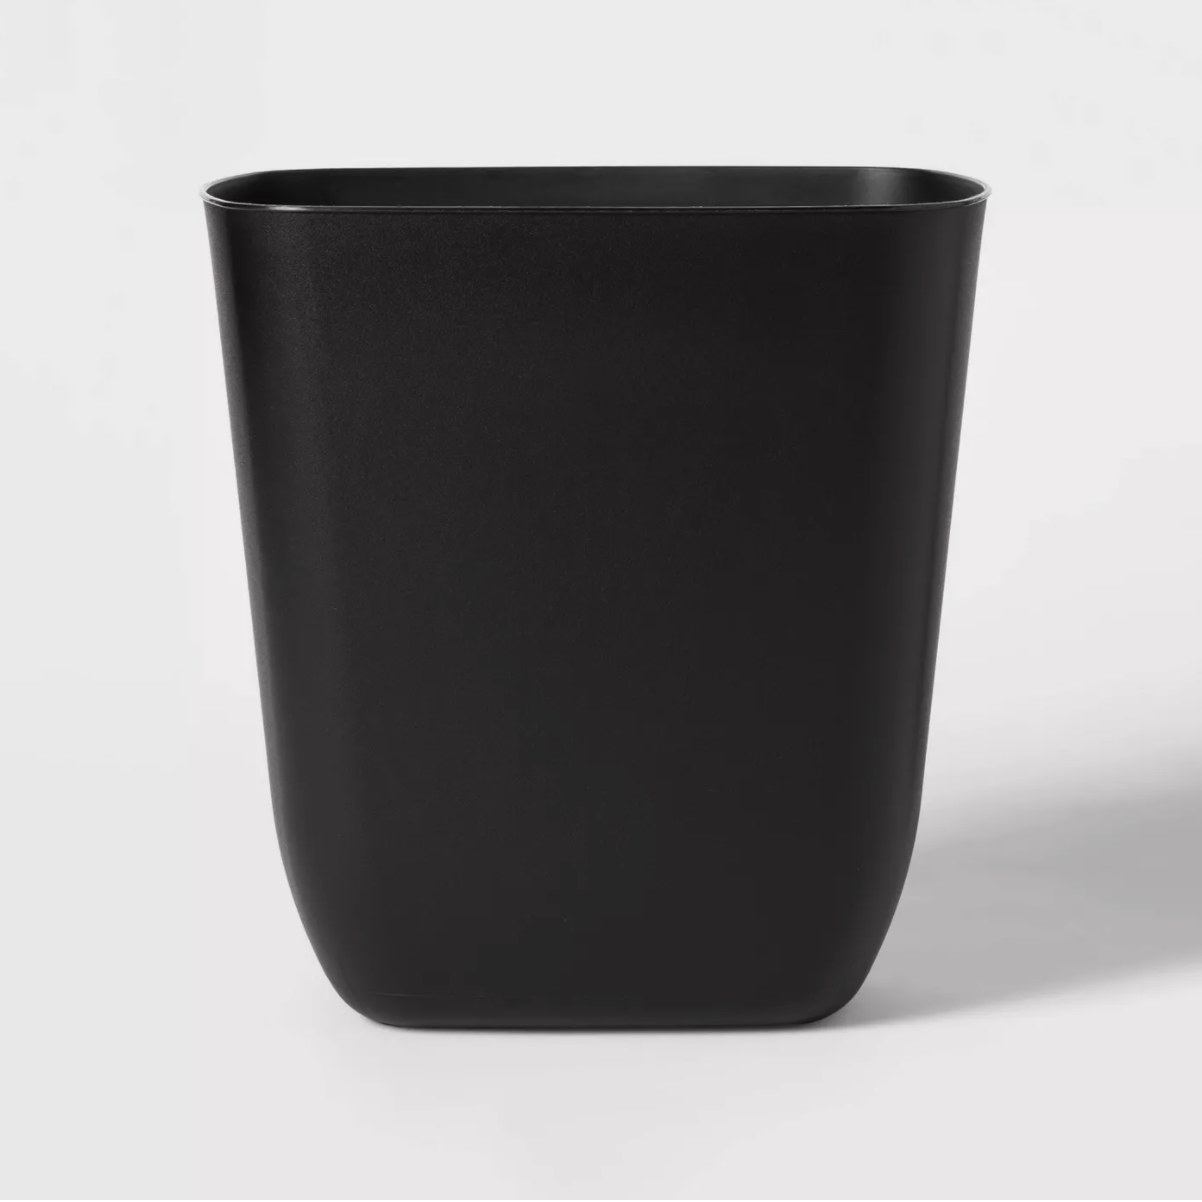 the open vanity trash can in black